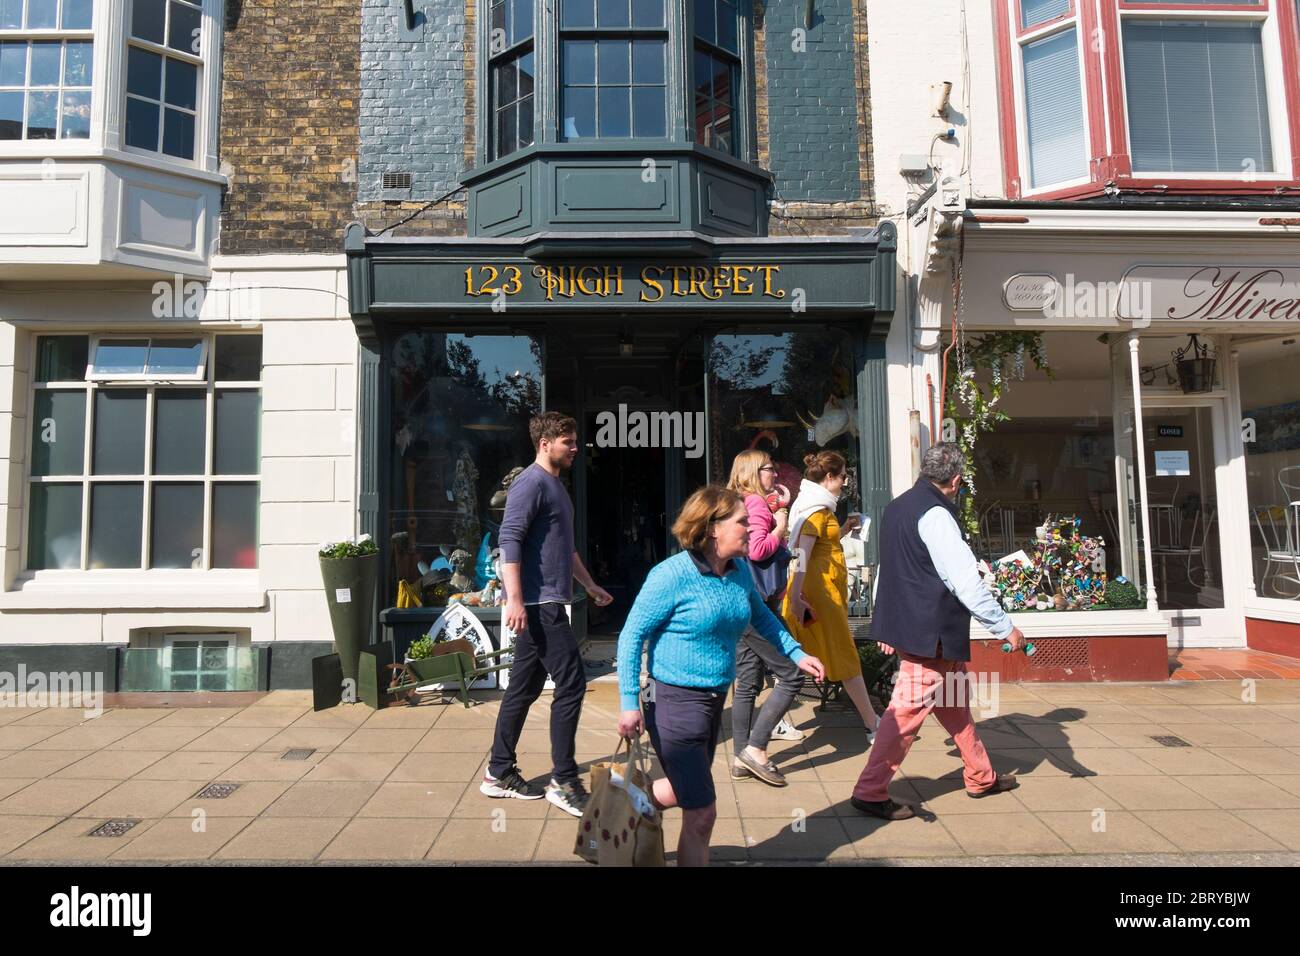 Deal kent high street hi-res stock photography and images - Alamy